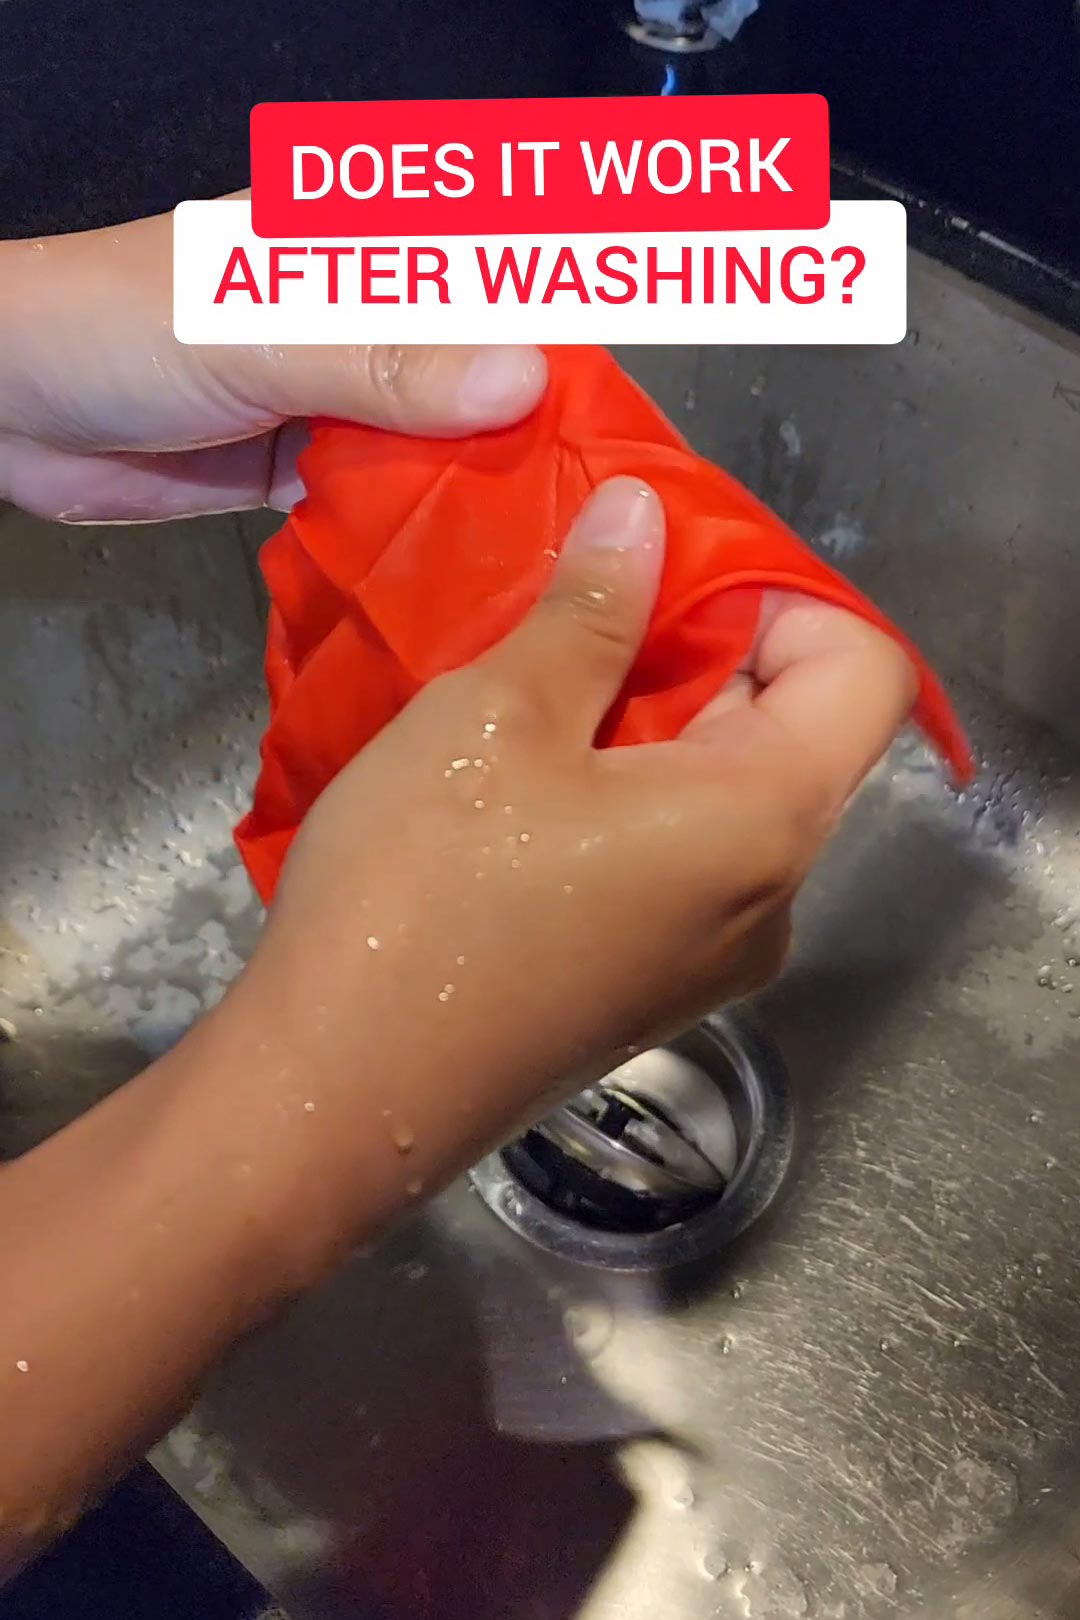 Does it work after washing?